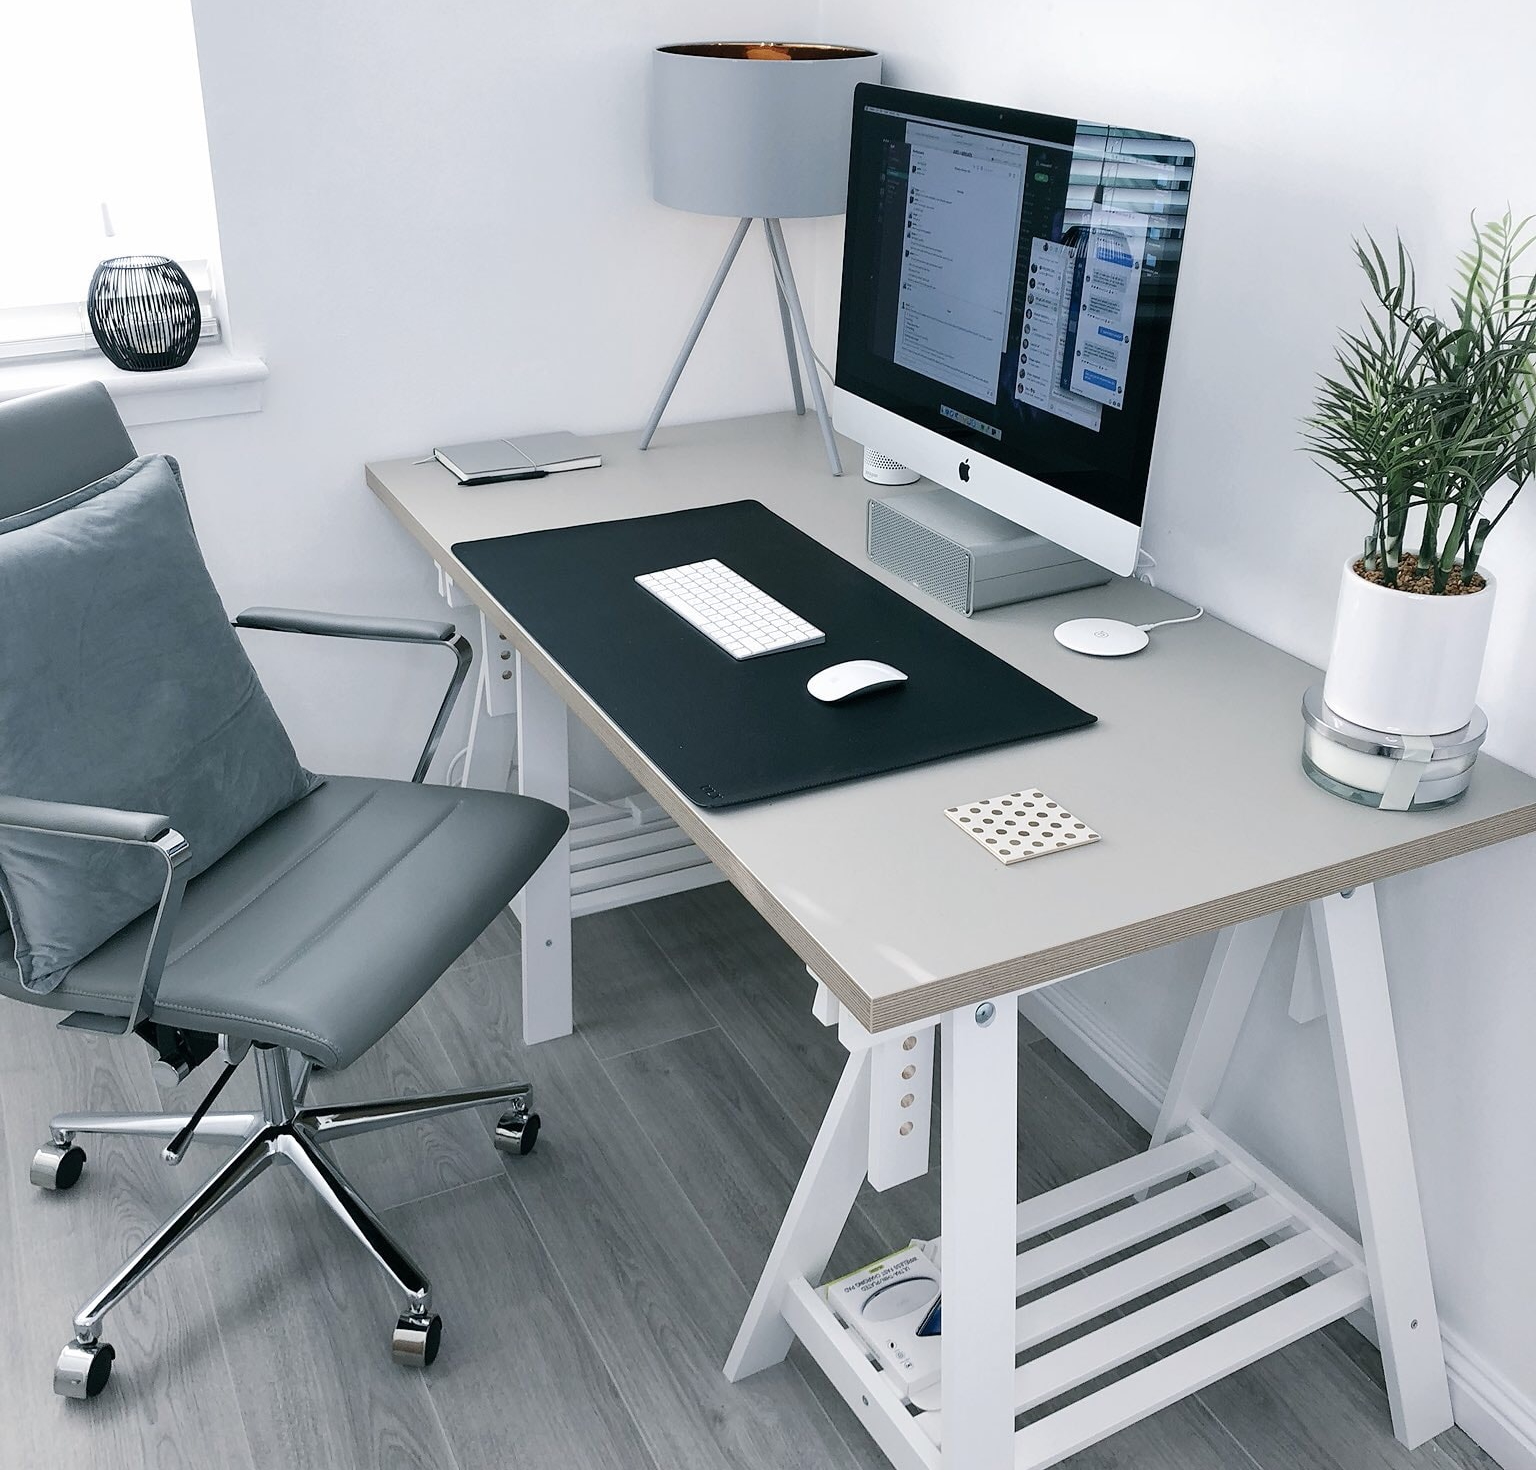 Buy a stylish and functional office table in Riyadh, perfect for productivity and organization.